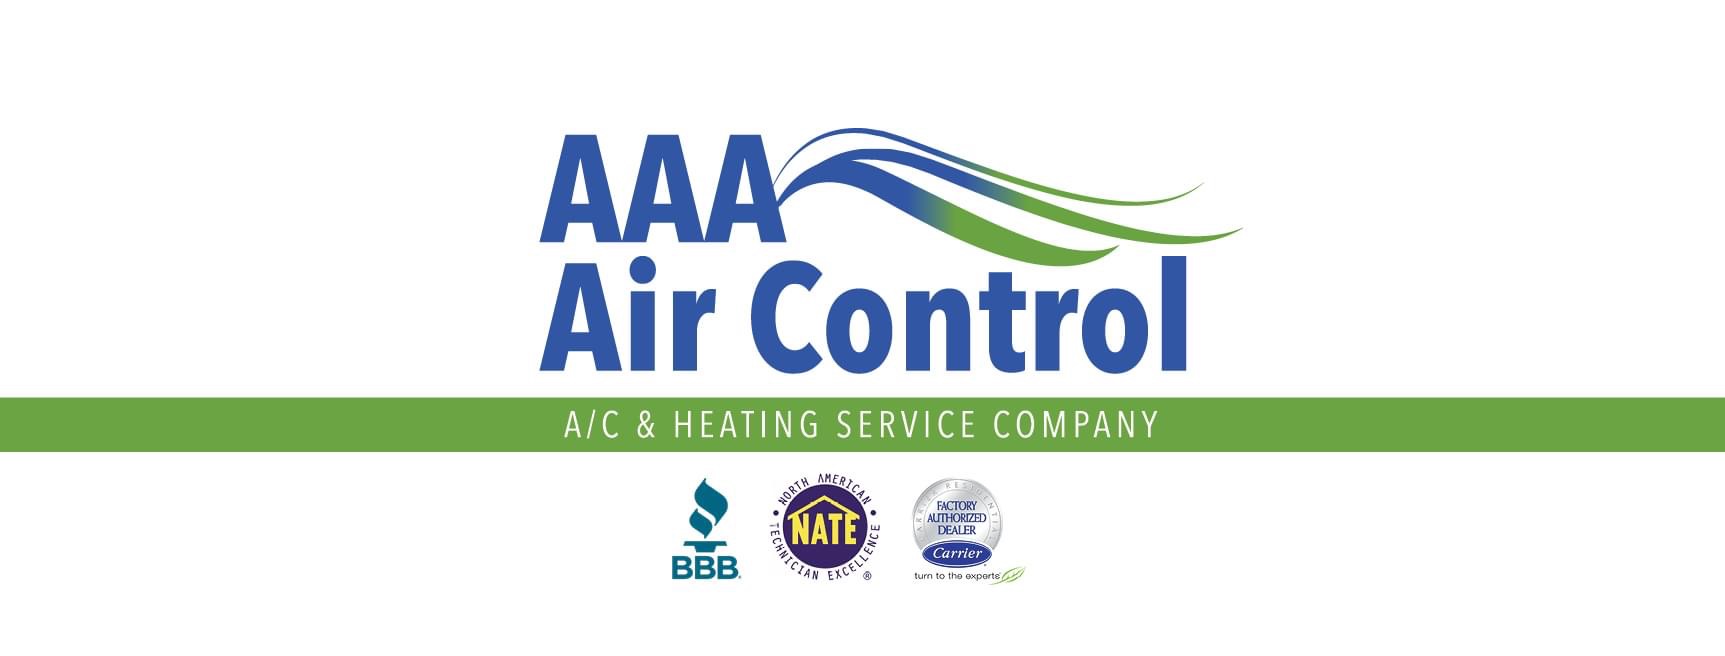 AAA Air Control A/C And Heating Service, Inc. Logo